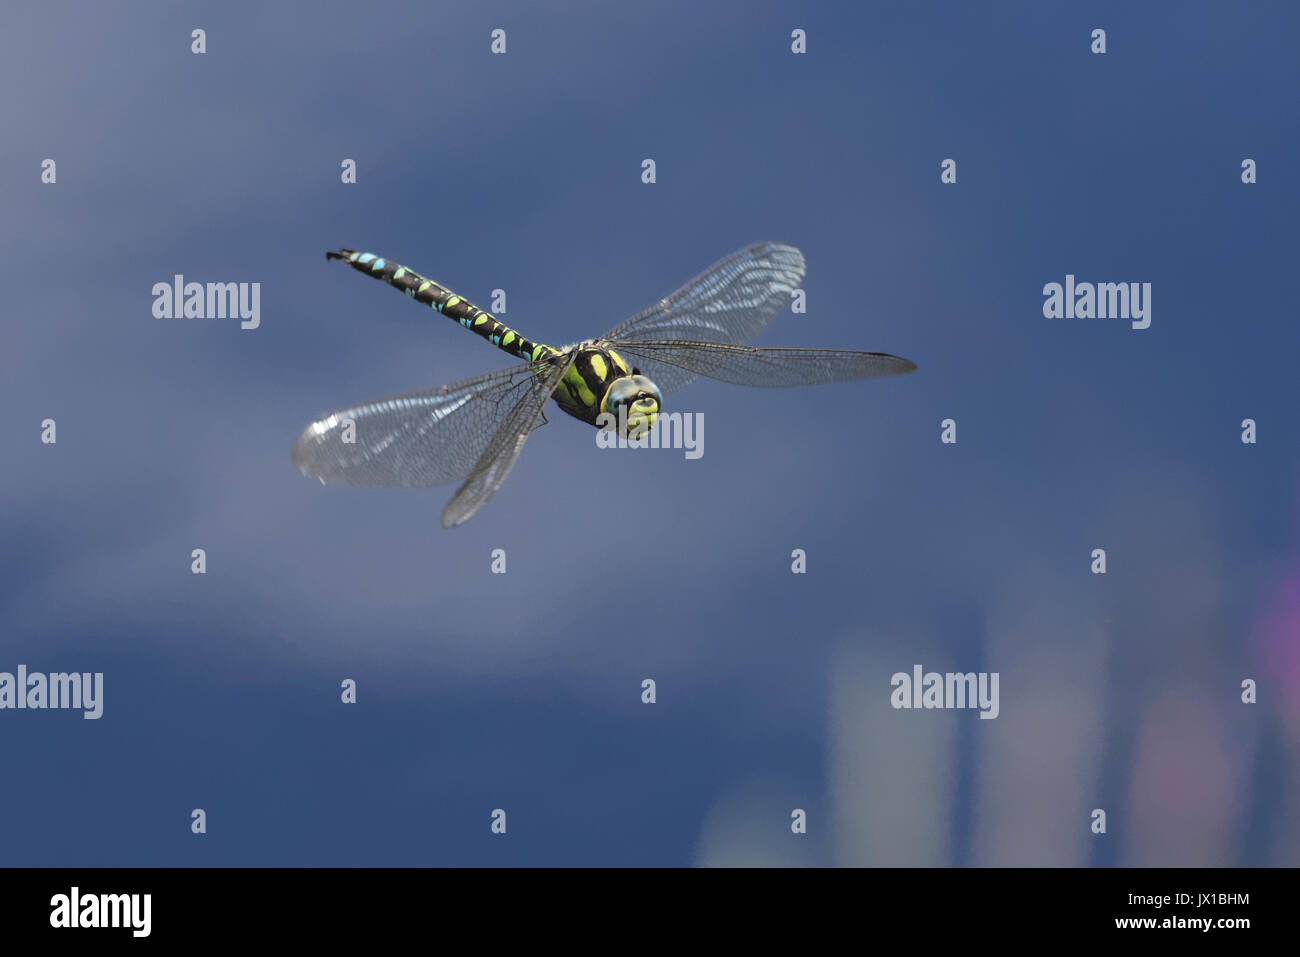 The dragonfly is flying above the grassy pond. Stock Photo